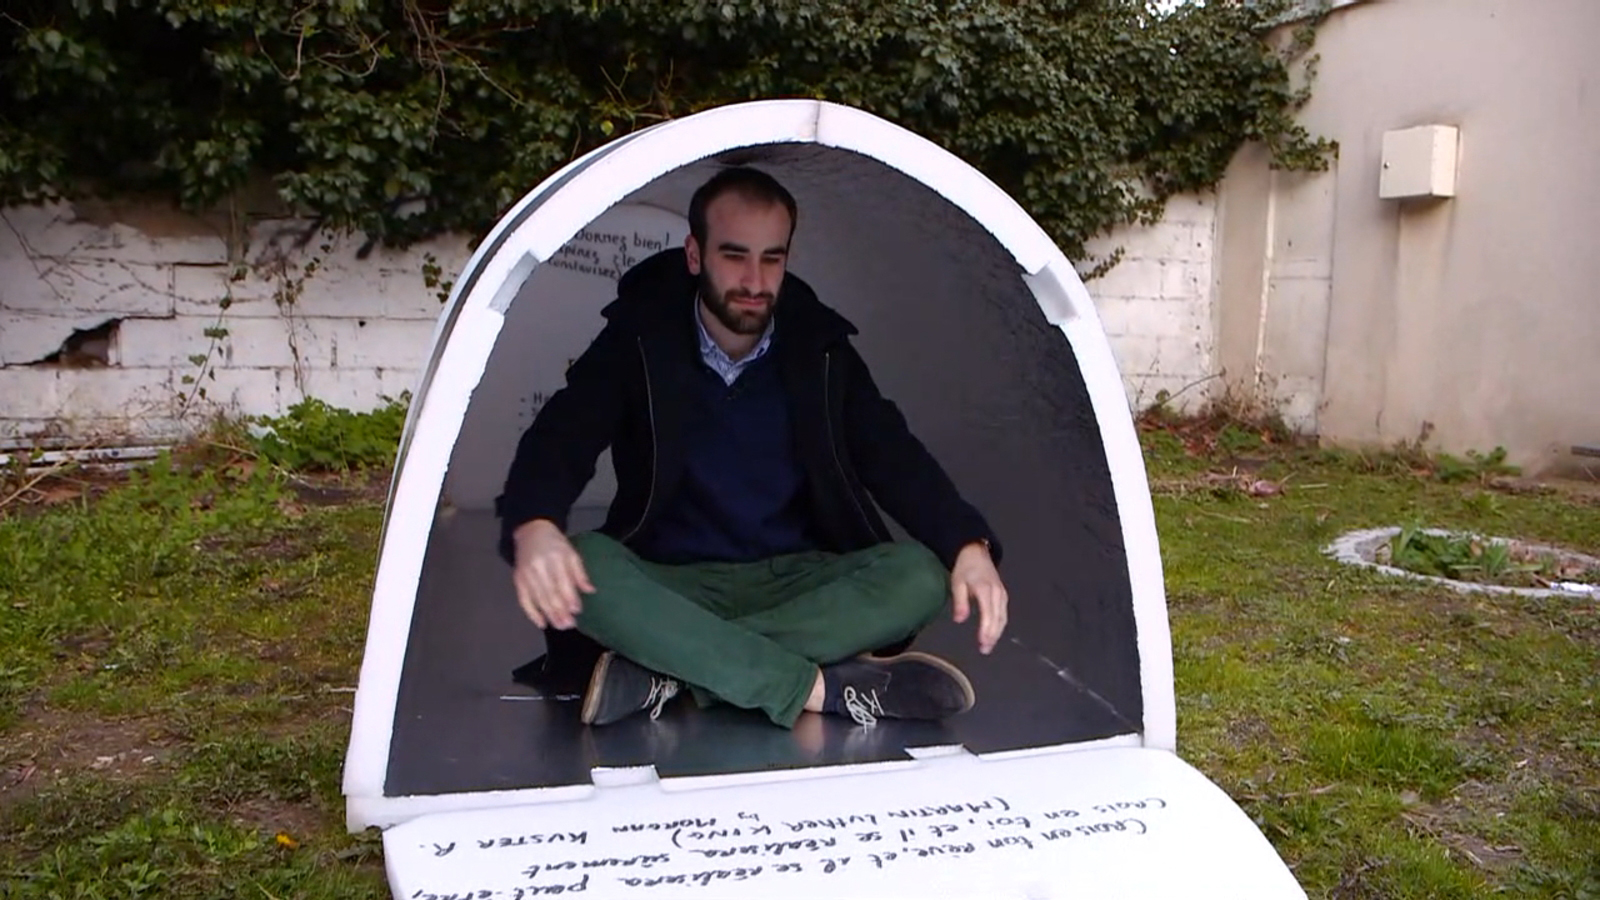 PHOTO: Homeless people in Paris are experimenting a new type of waterproof shelters that remain hot in freezing temperatures.